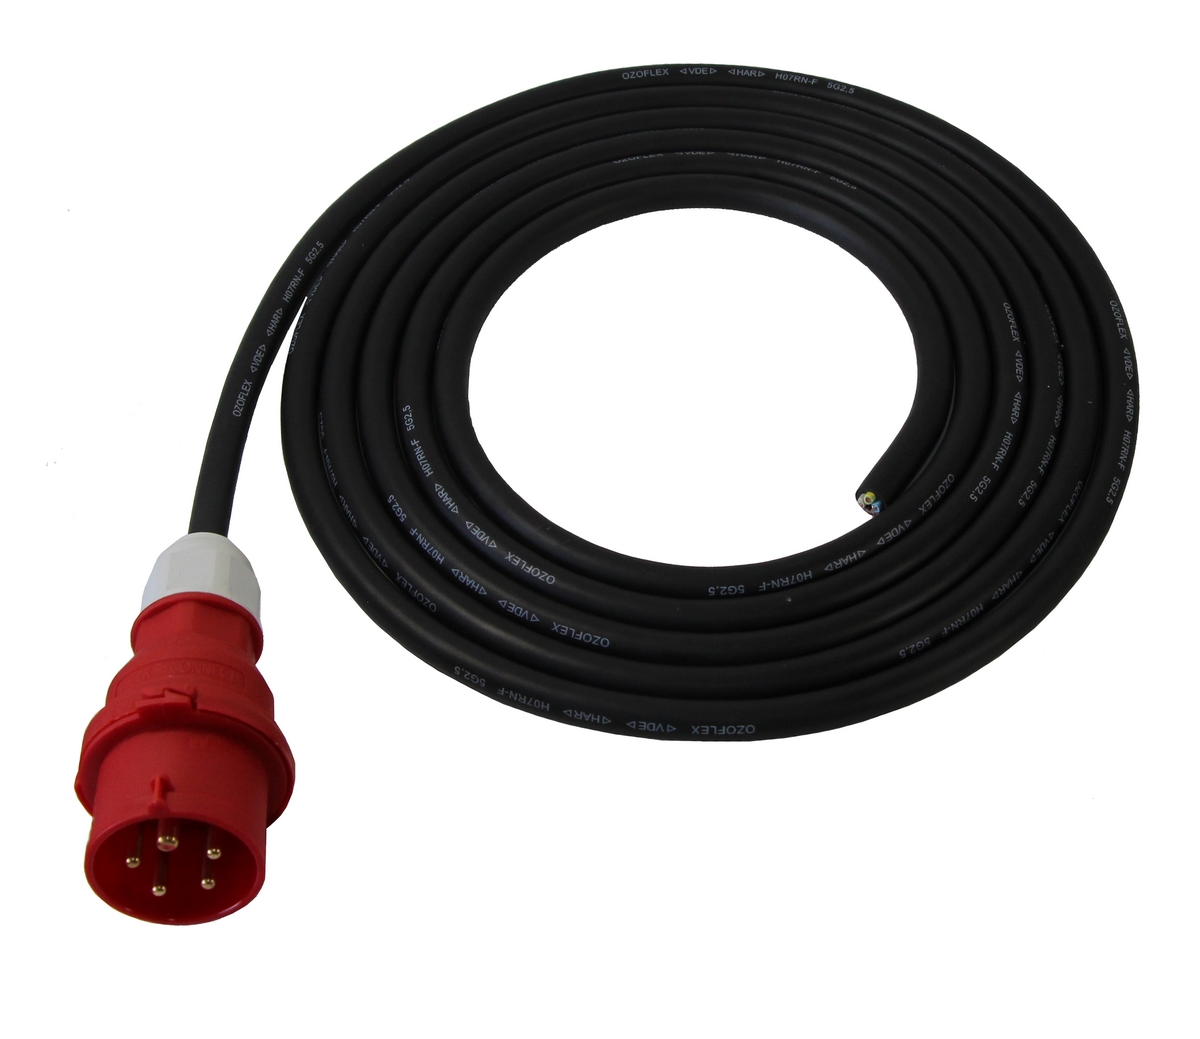 Connection cable 5 x 1.5 mm² with CEE 16A plug 400 volts